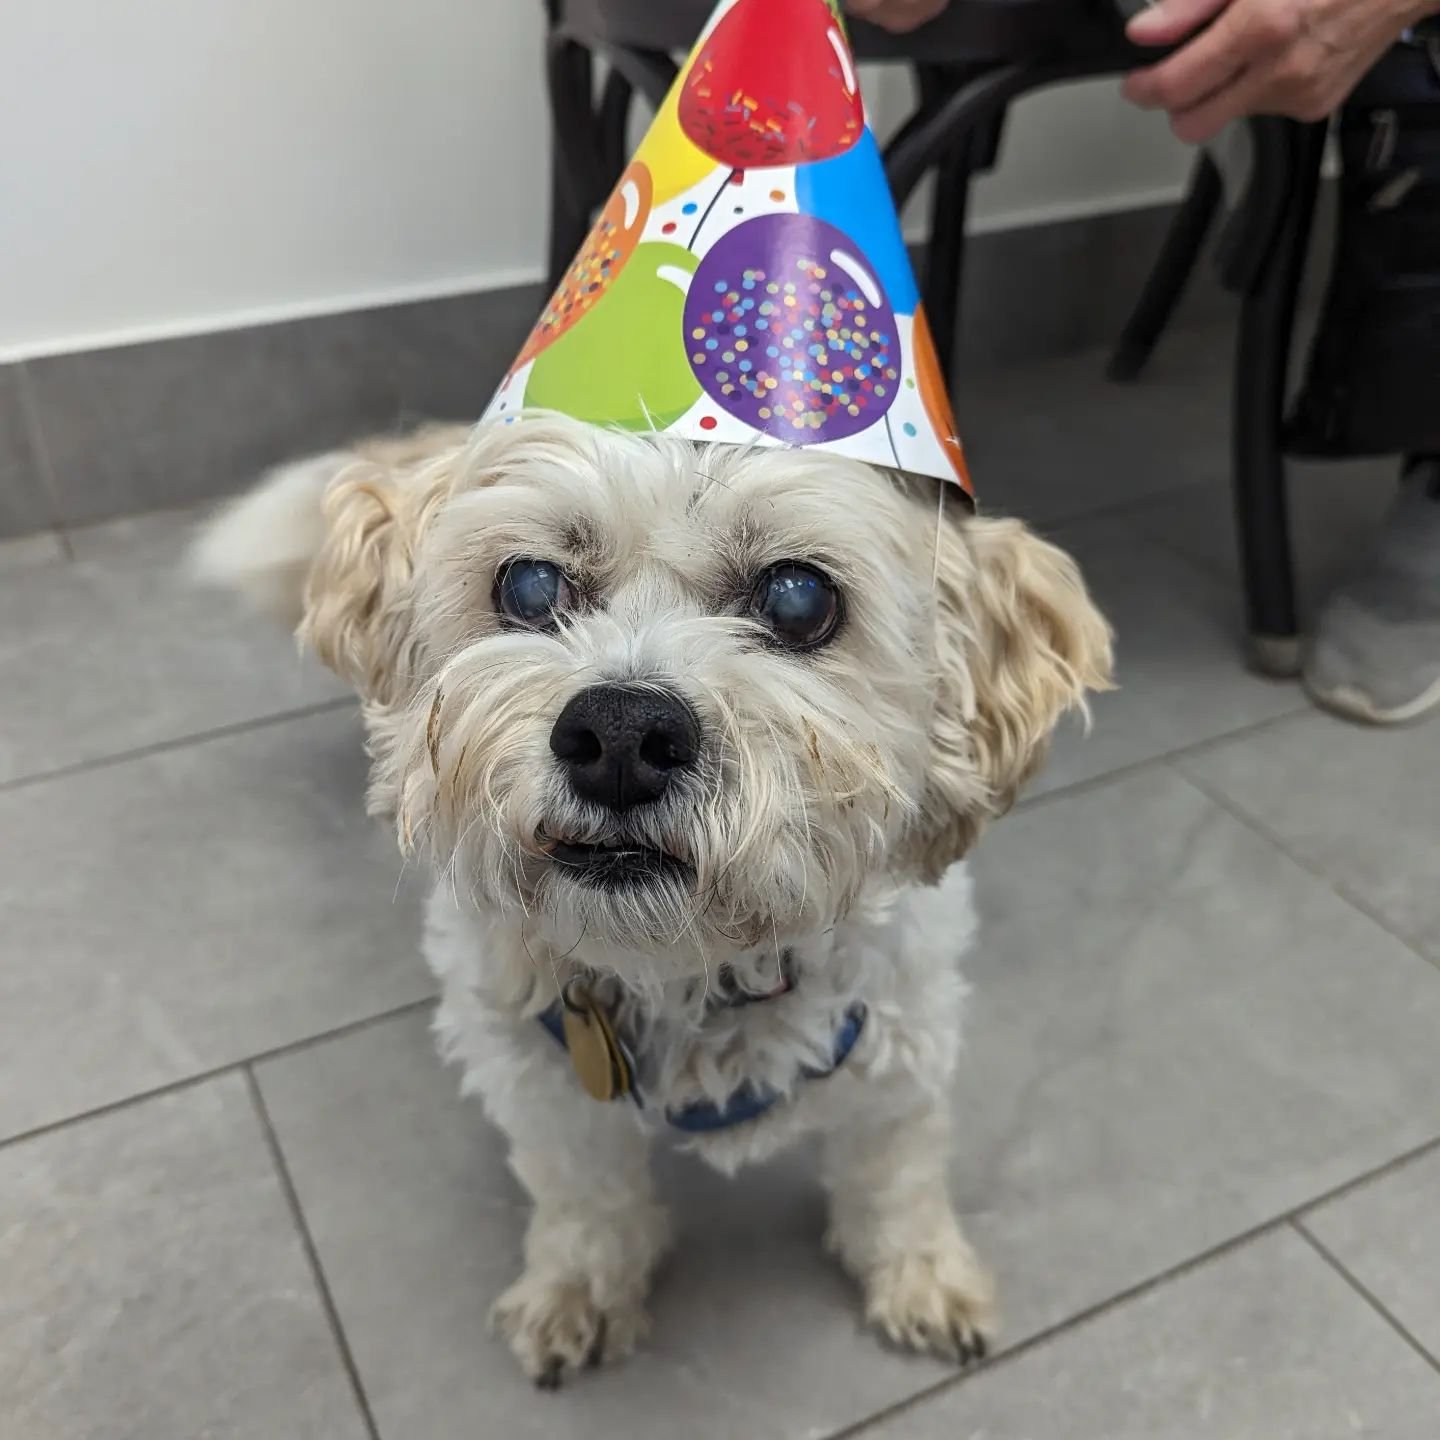 Happiest Birthday to sweet man Wally! He is celebrating his 16th birthday today!! 🥳 We made sure to give him a couple extra treats for such a special day!